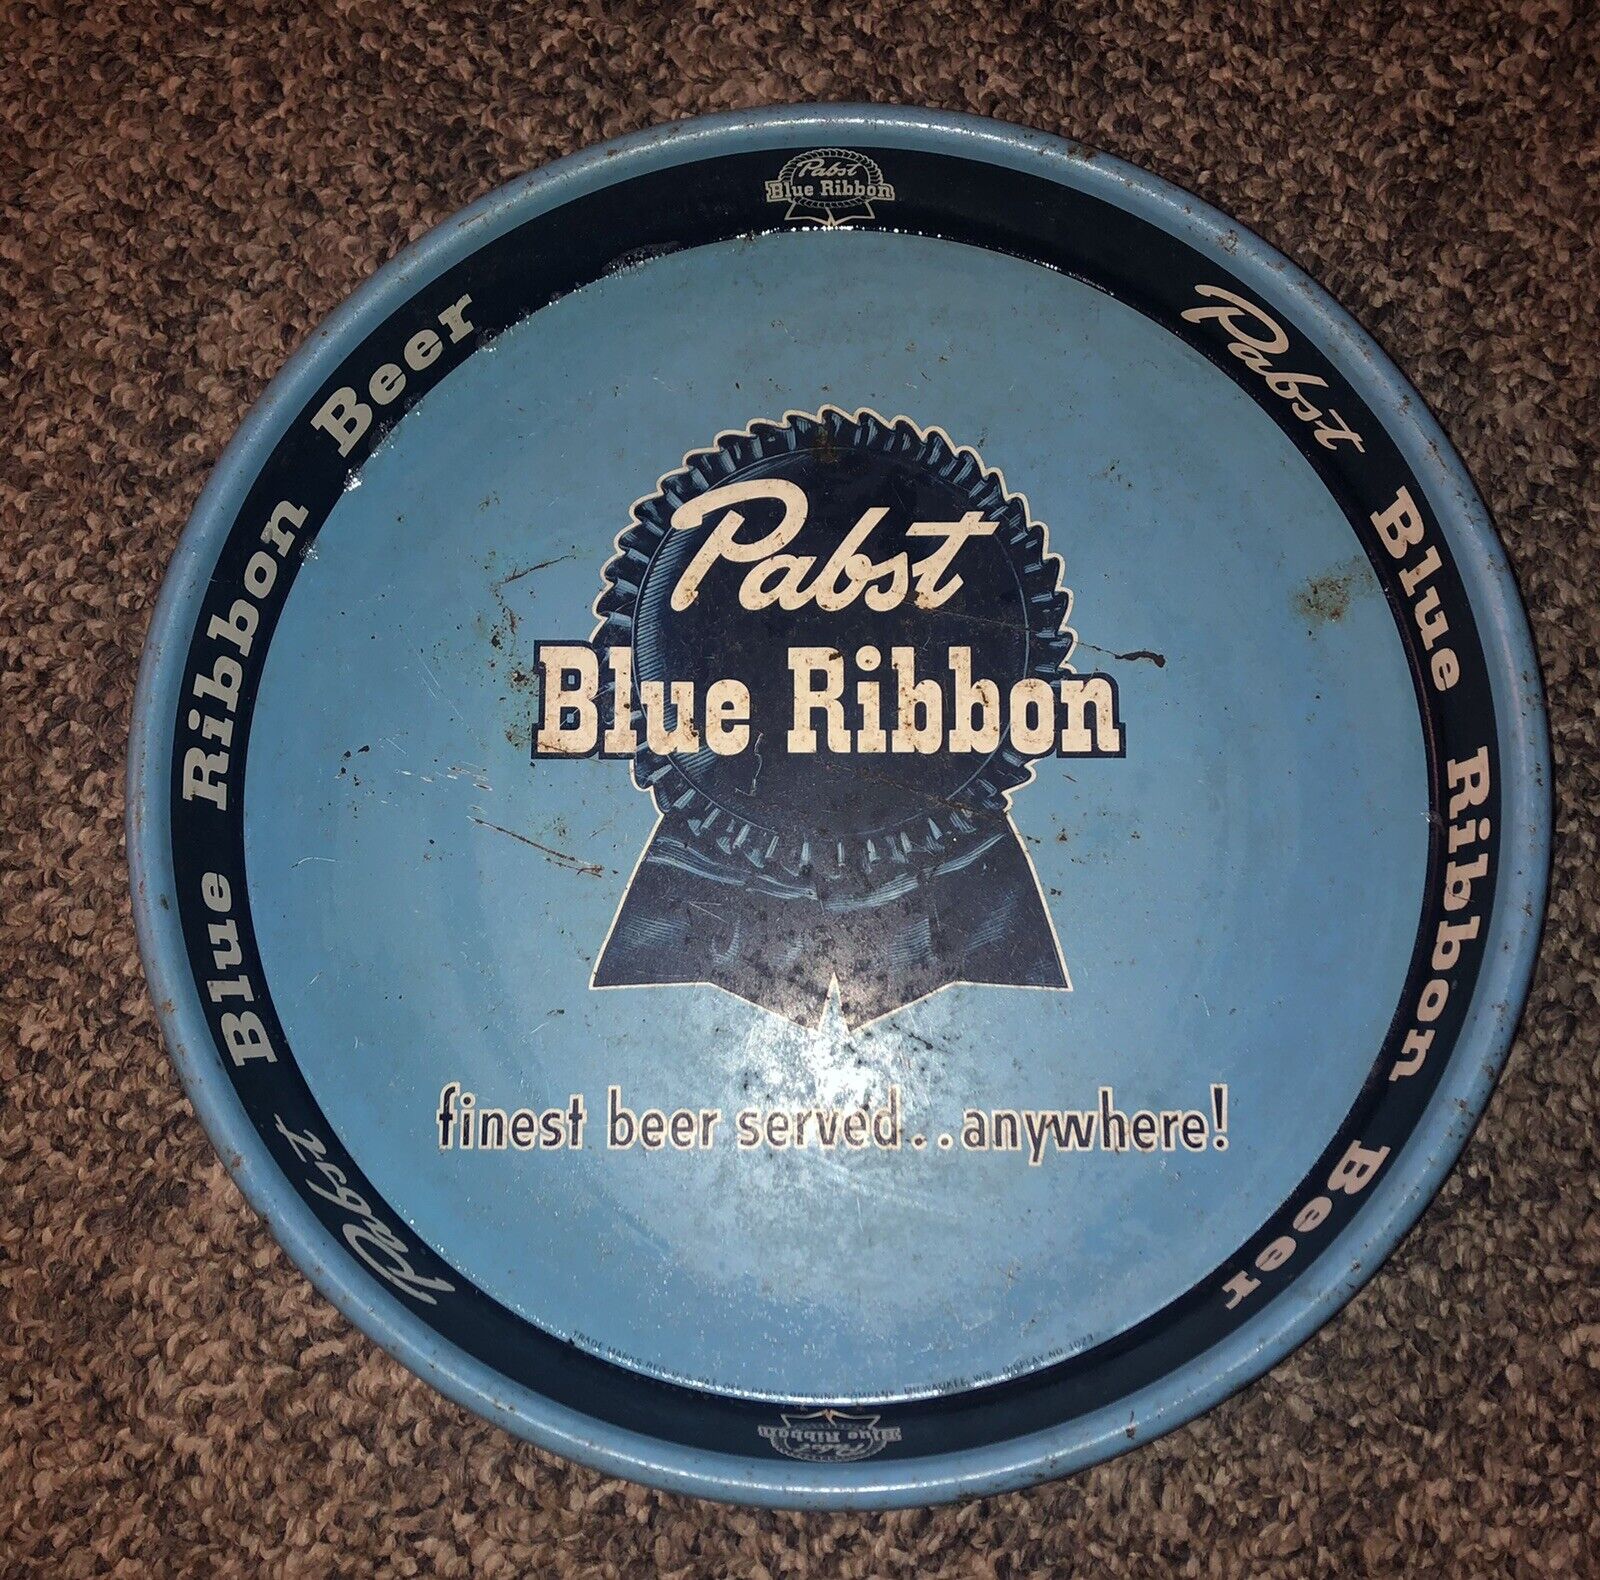 Vintage Pabst Blue Ribbon Beer Serving Tray Brewing Milwaukee Wisconsin WI PBR